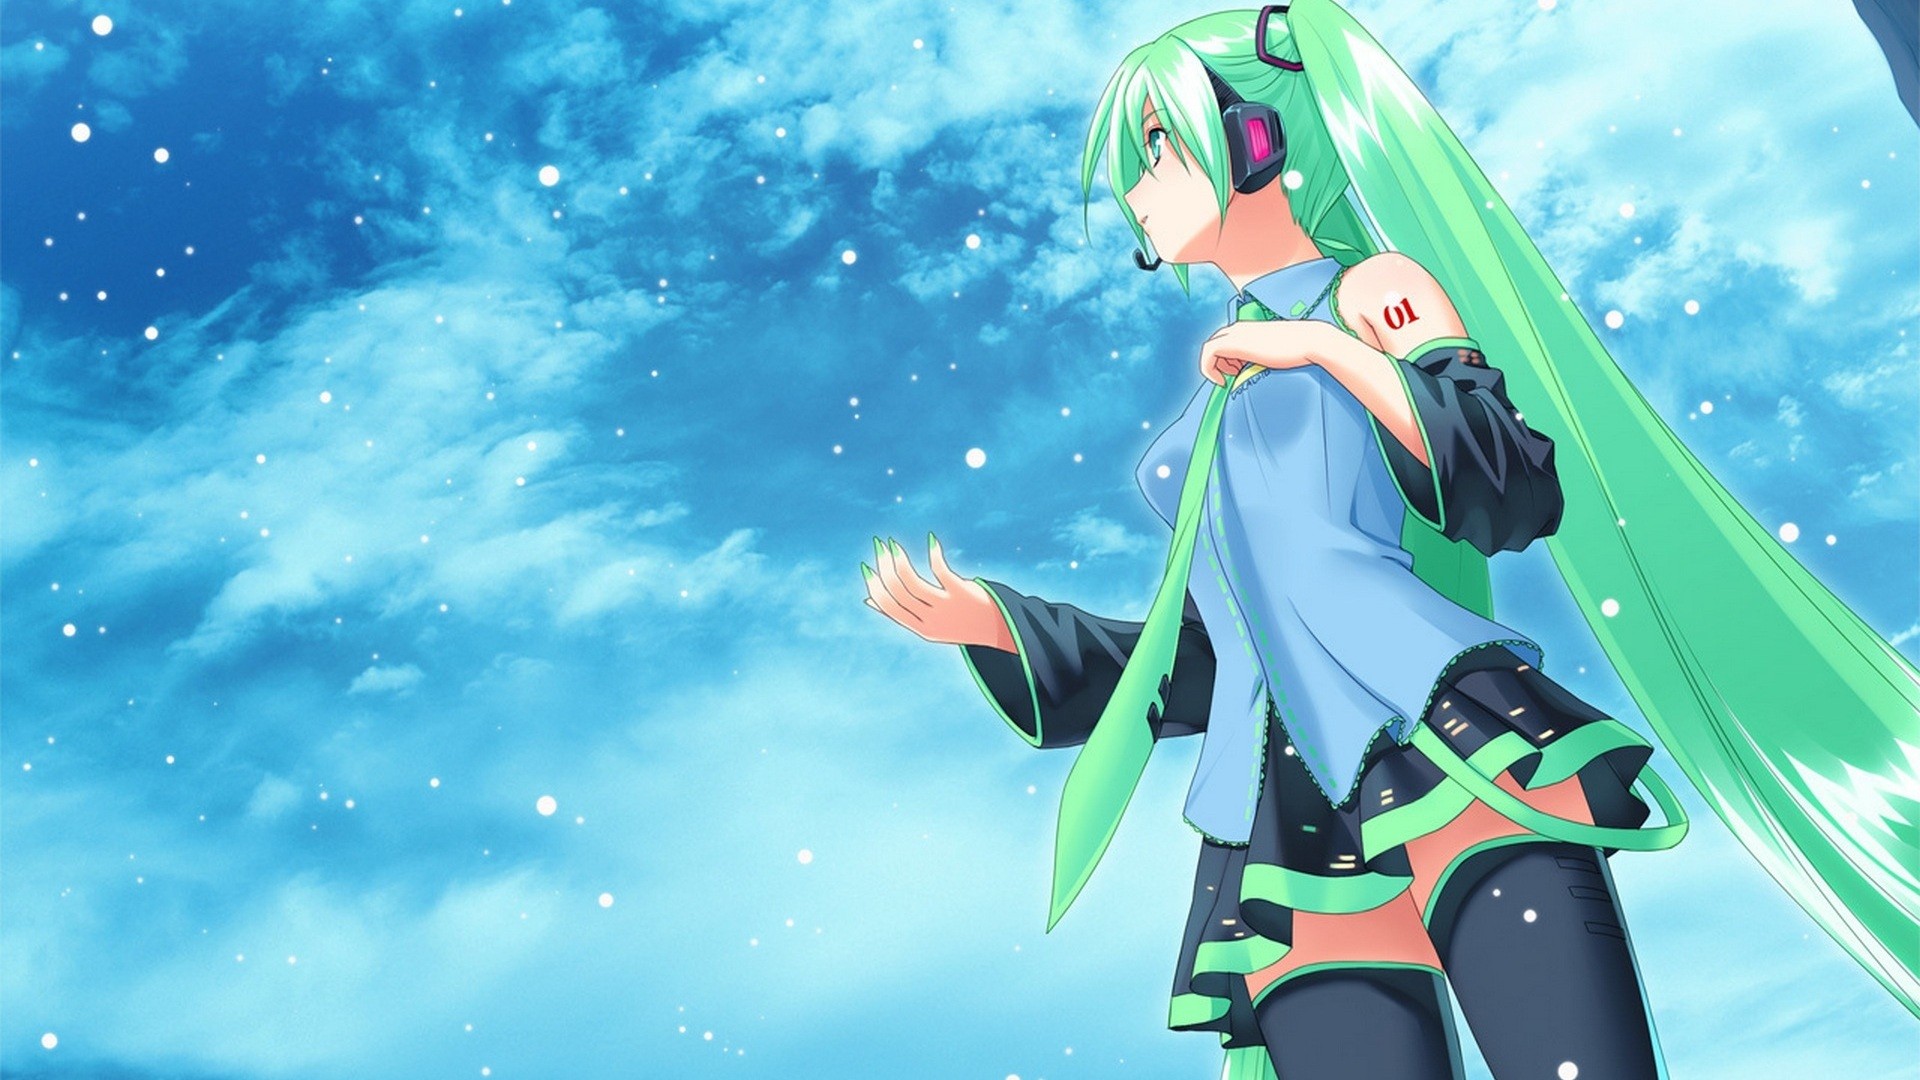 Cute Anime Girl With Green Hair Wallpaper For Desktop And Mobiles